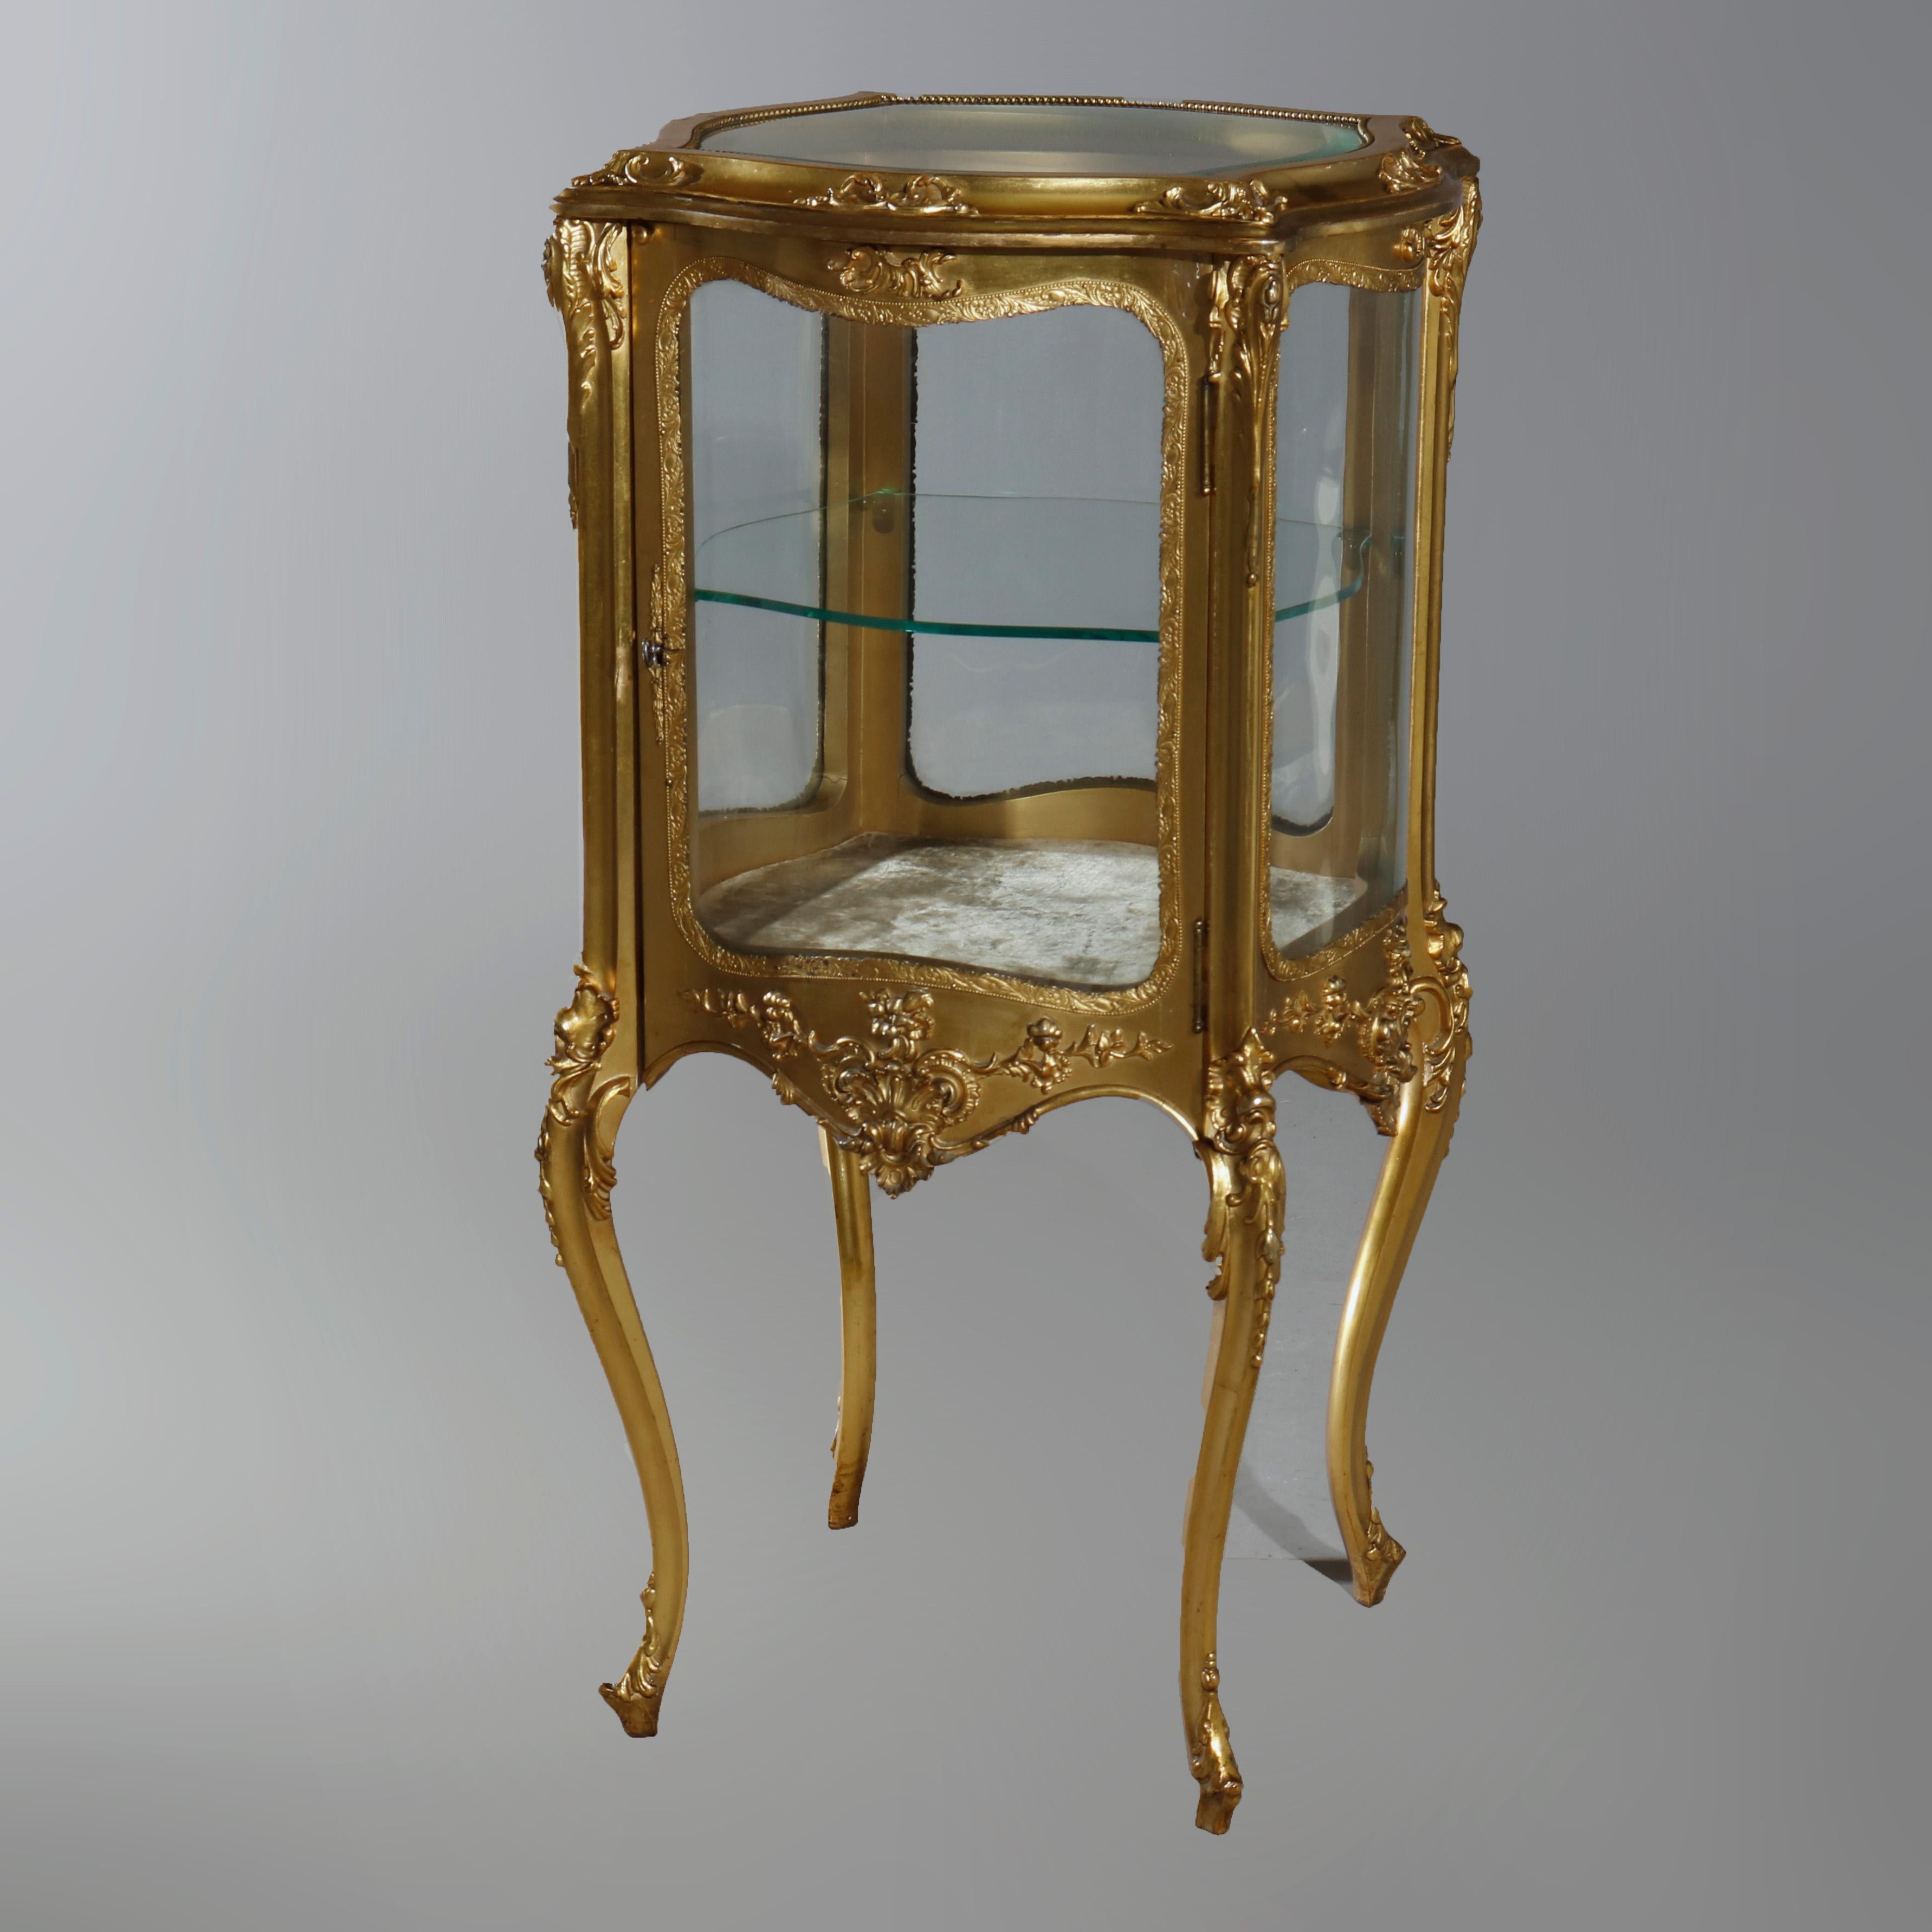 Carved Antique French Louis XIV Serpentine Giltwood Vitrine, circa 1890